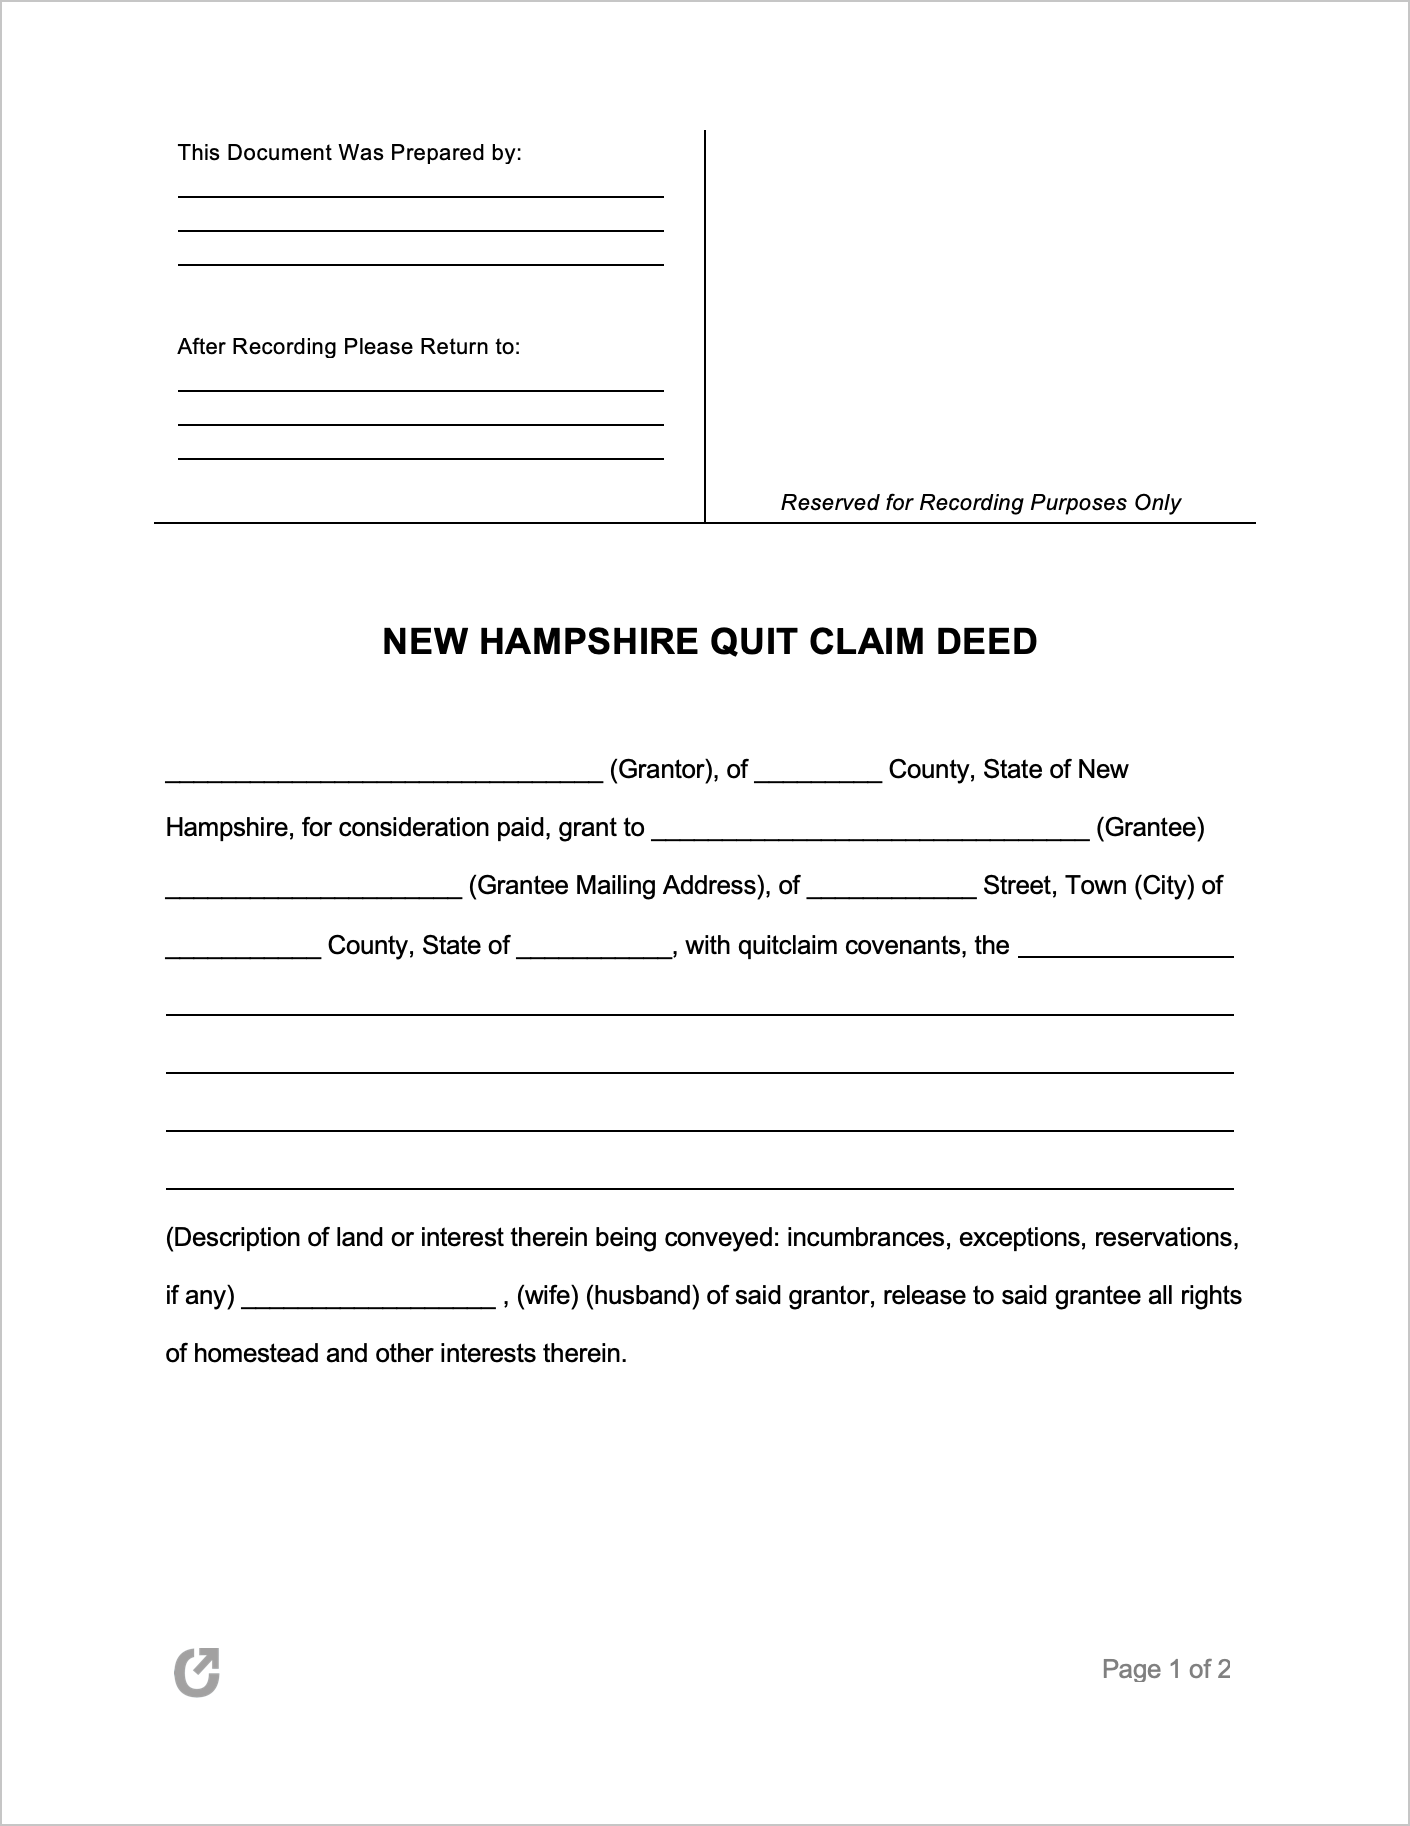 free-new-hampshire-quit-claim-deed-form-pdf-word